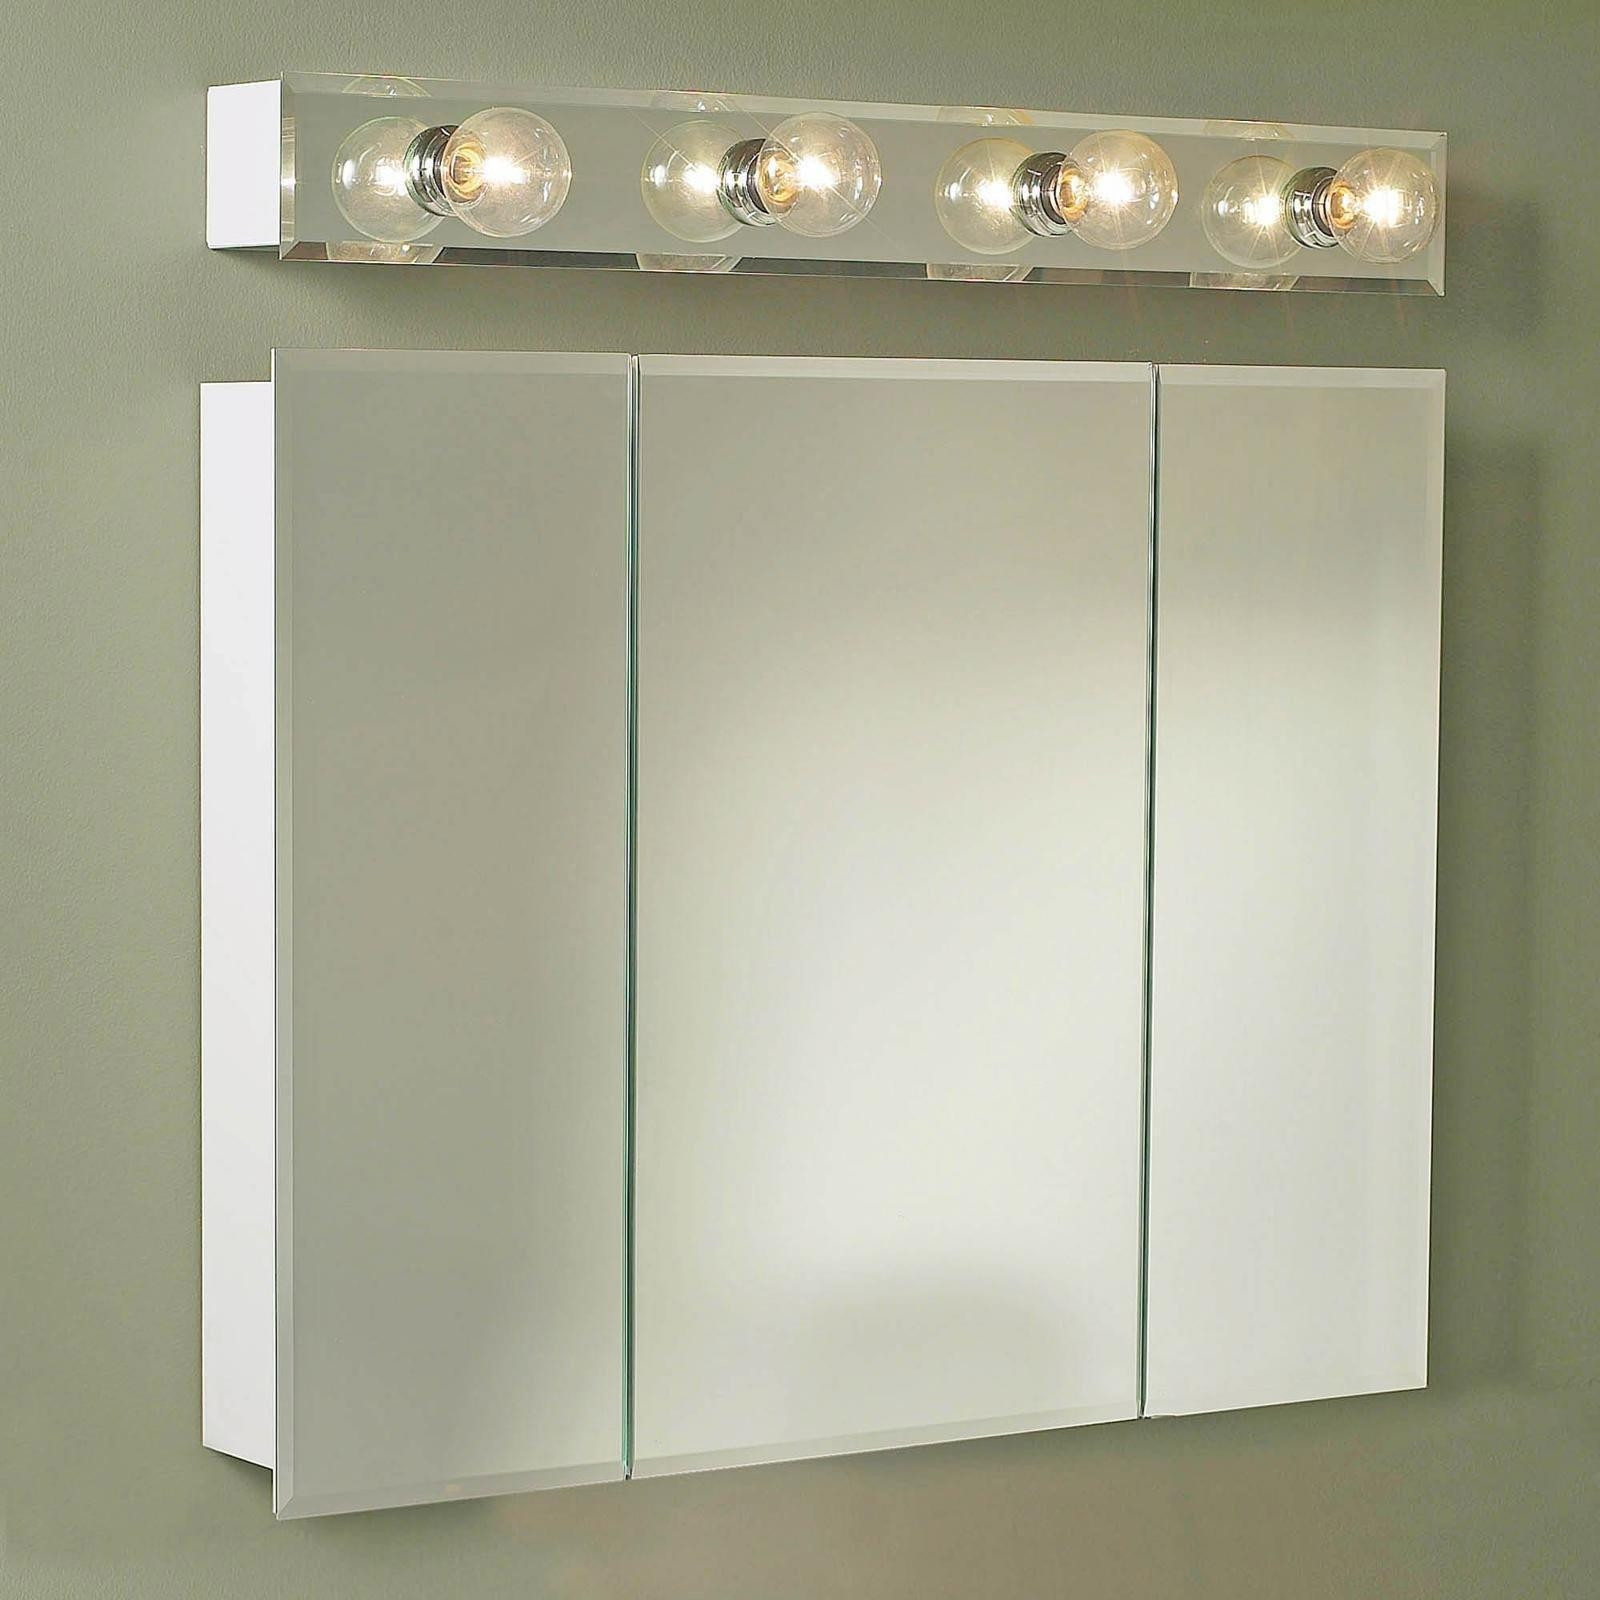 Lowes Bathroom Storage Cabinets
 20 Collection of 3 Door Medicine Cabinets With Mirrors